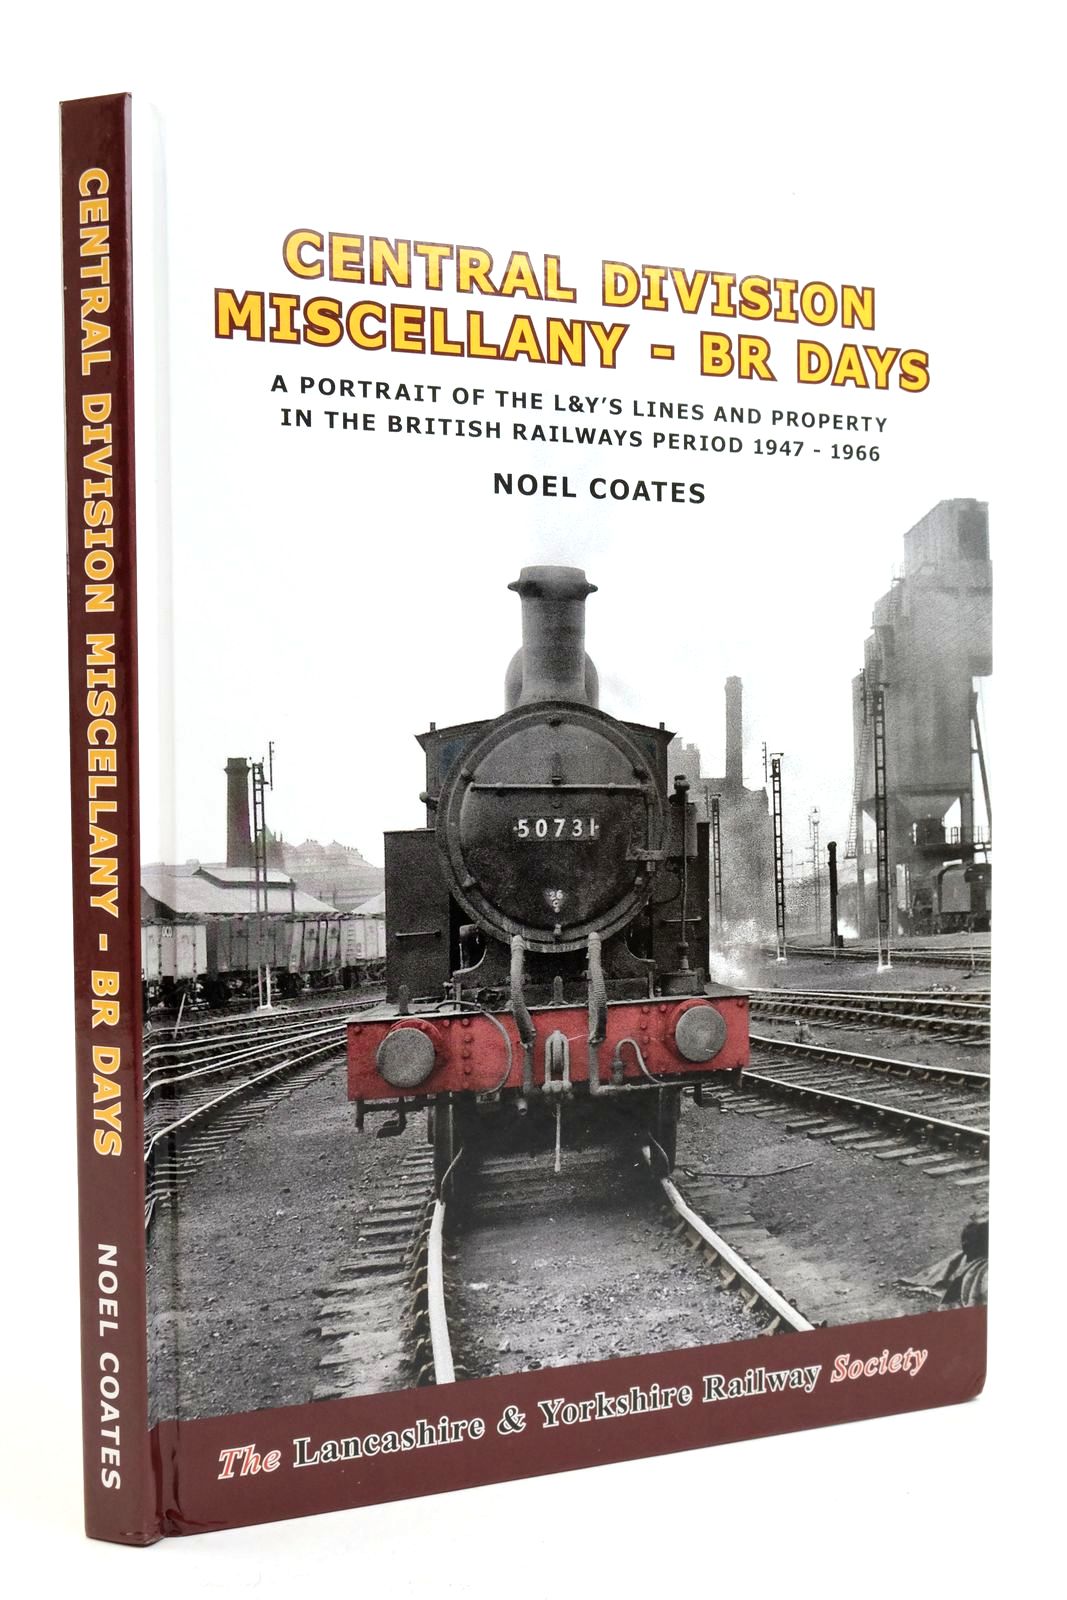 Photo of CENTRAL DIVISION MISCELLANY - BR DAYS written by Coates, Neil published by The Lancashire & Yorkshire Railway Society (STOCK CODE: 2138928)  for sale by Stella & Rose's Books